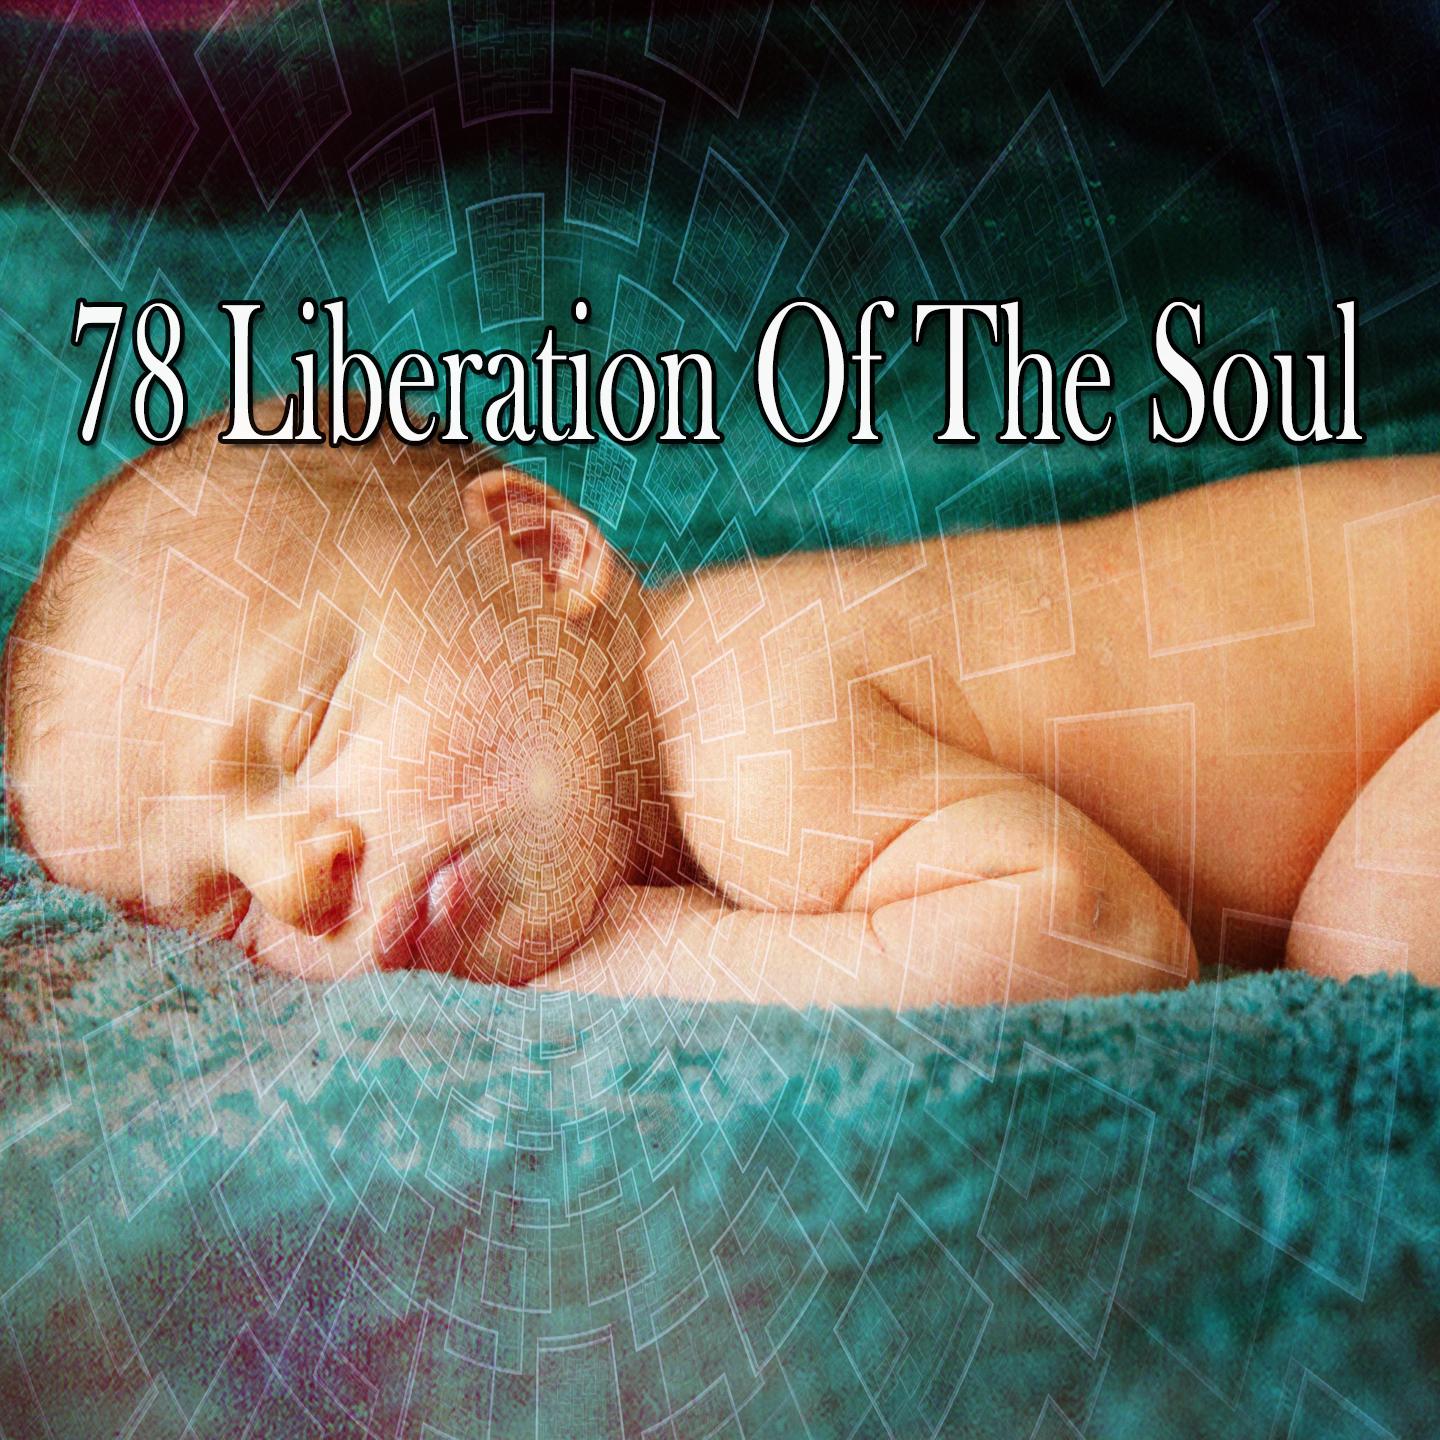 78 Liberation of the Soul